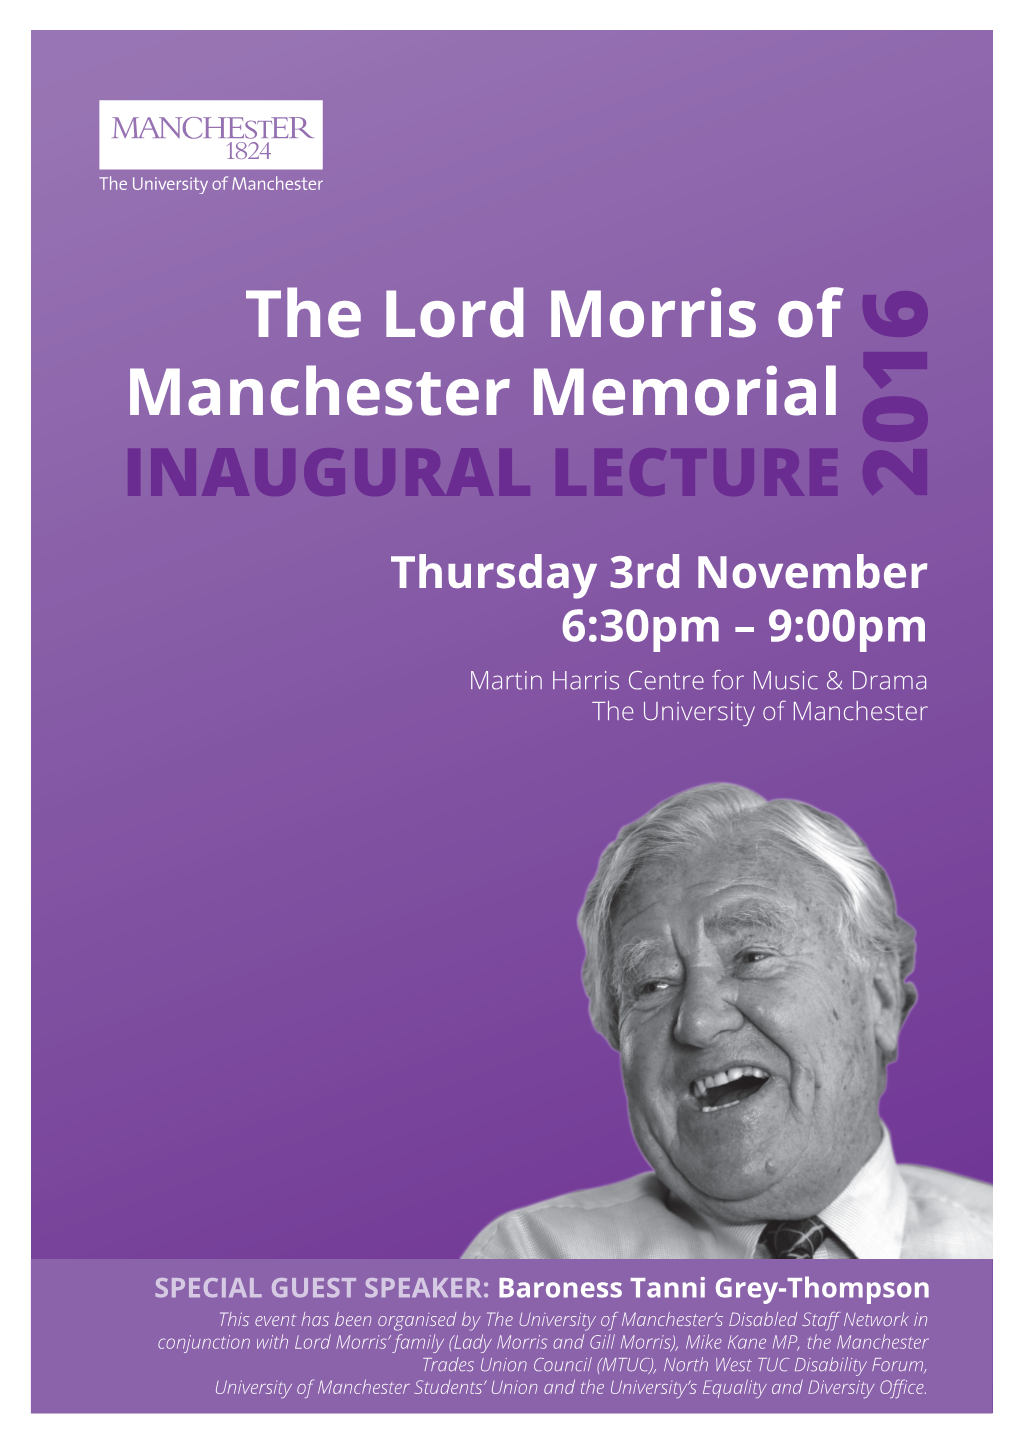 INAUGURAL LECTURE 2016 Thursday 3Rd November 6:30Pm – 9:00Pm Martin Harris Centre for Music & Drama the University of Manchester